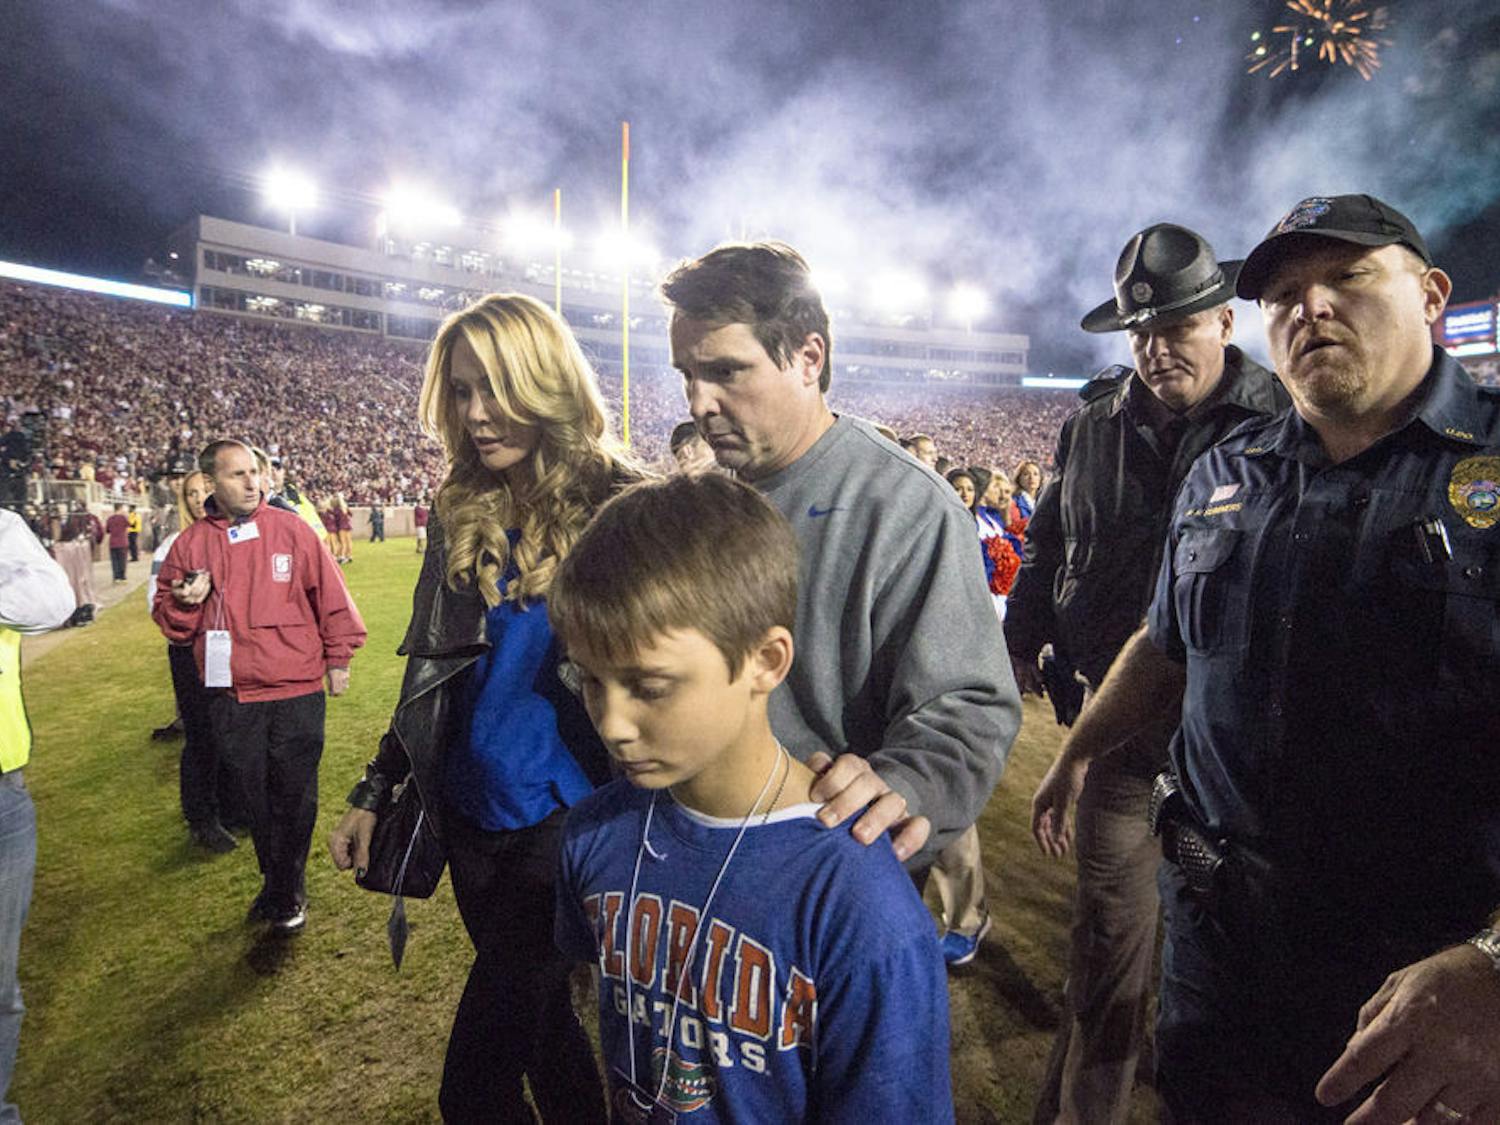 UF coach Will Muschamp walks off the field at Doak Campbell Stadium with his wife and kids following Florida's 24-19 loss to No. 3 Florida State on Saturday in Tallahassee.